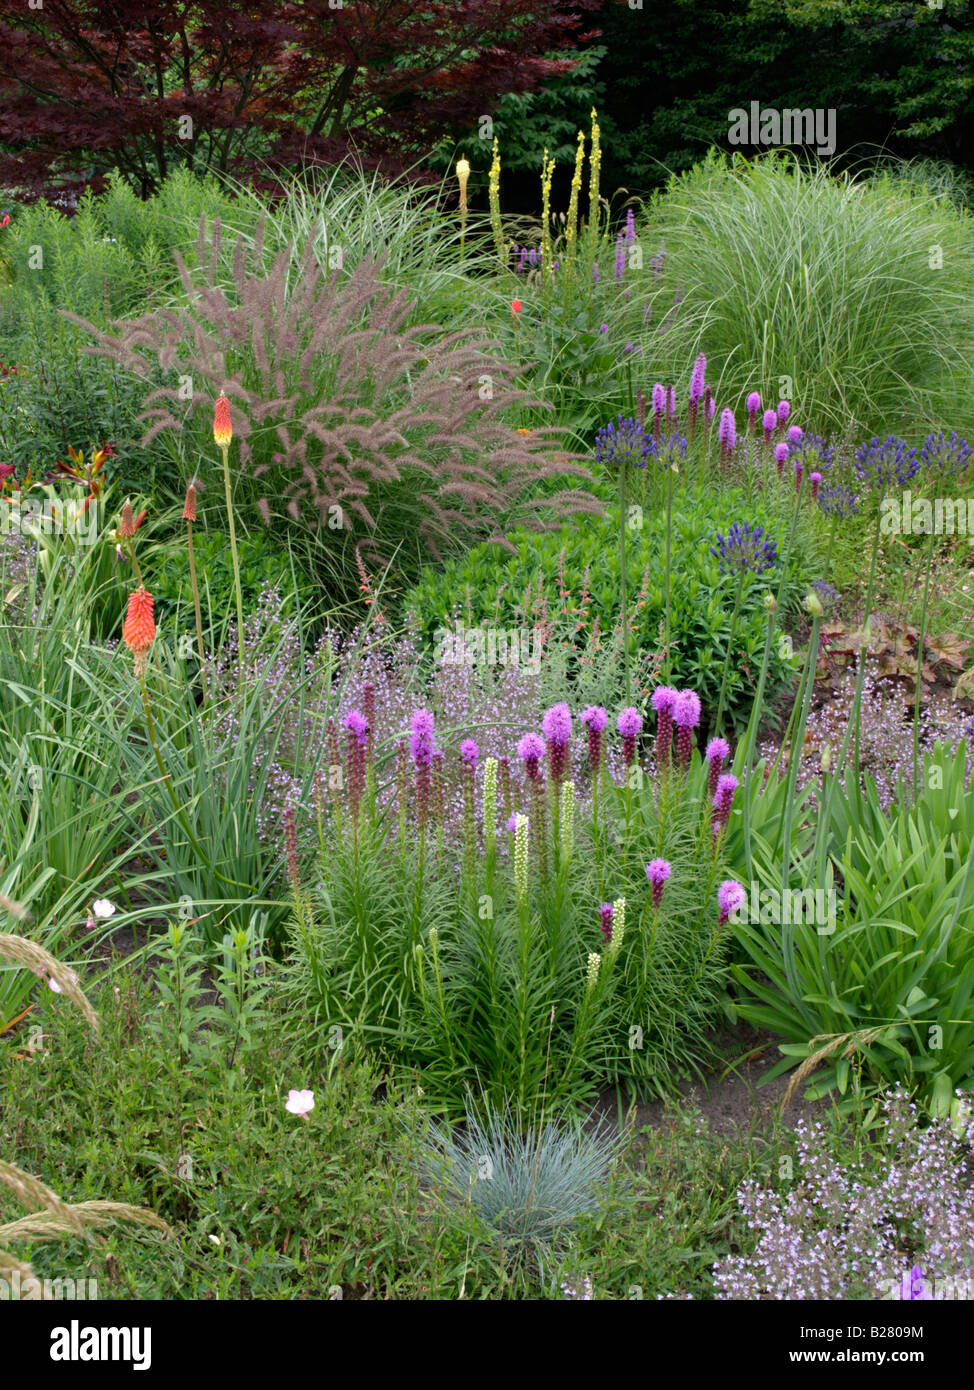 Dense blazing star (Liatris spicata), torch lily (Kniphofia) and African lily (Agapanthus) Stock Photo